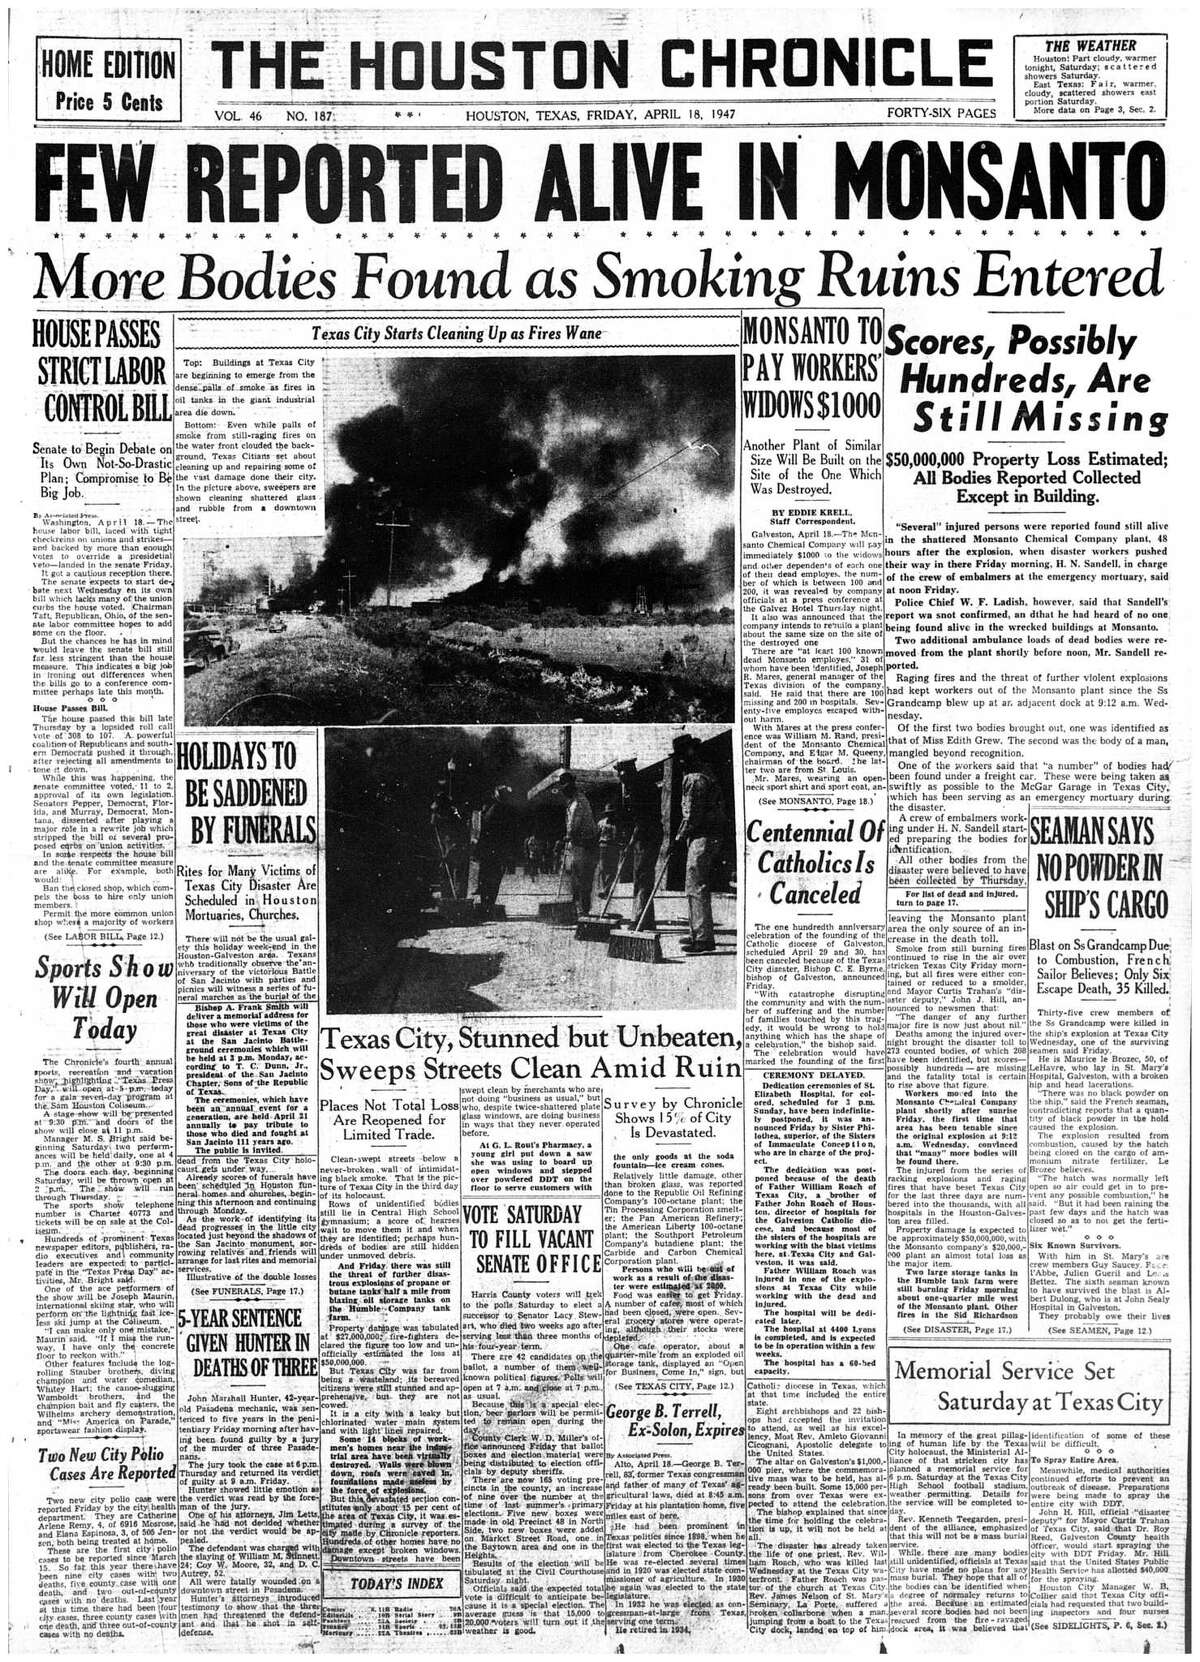 Houston Chronicle front page - April 18, 1947 - section 1, page 1